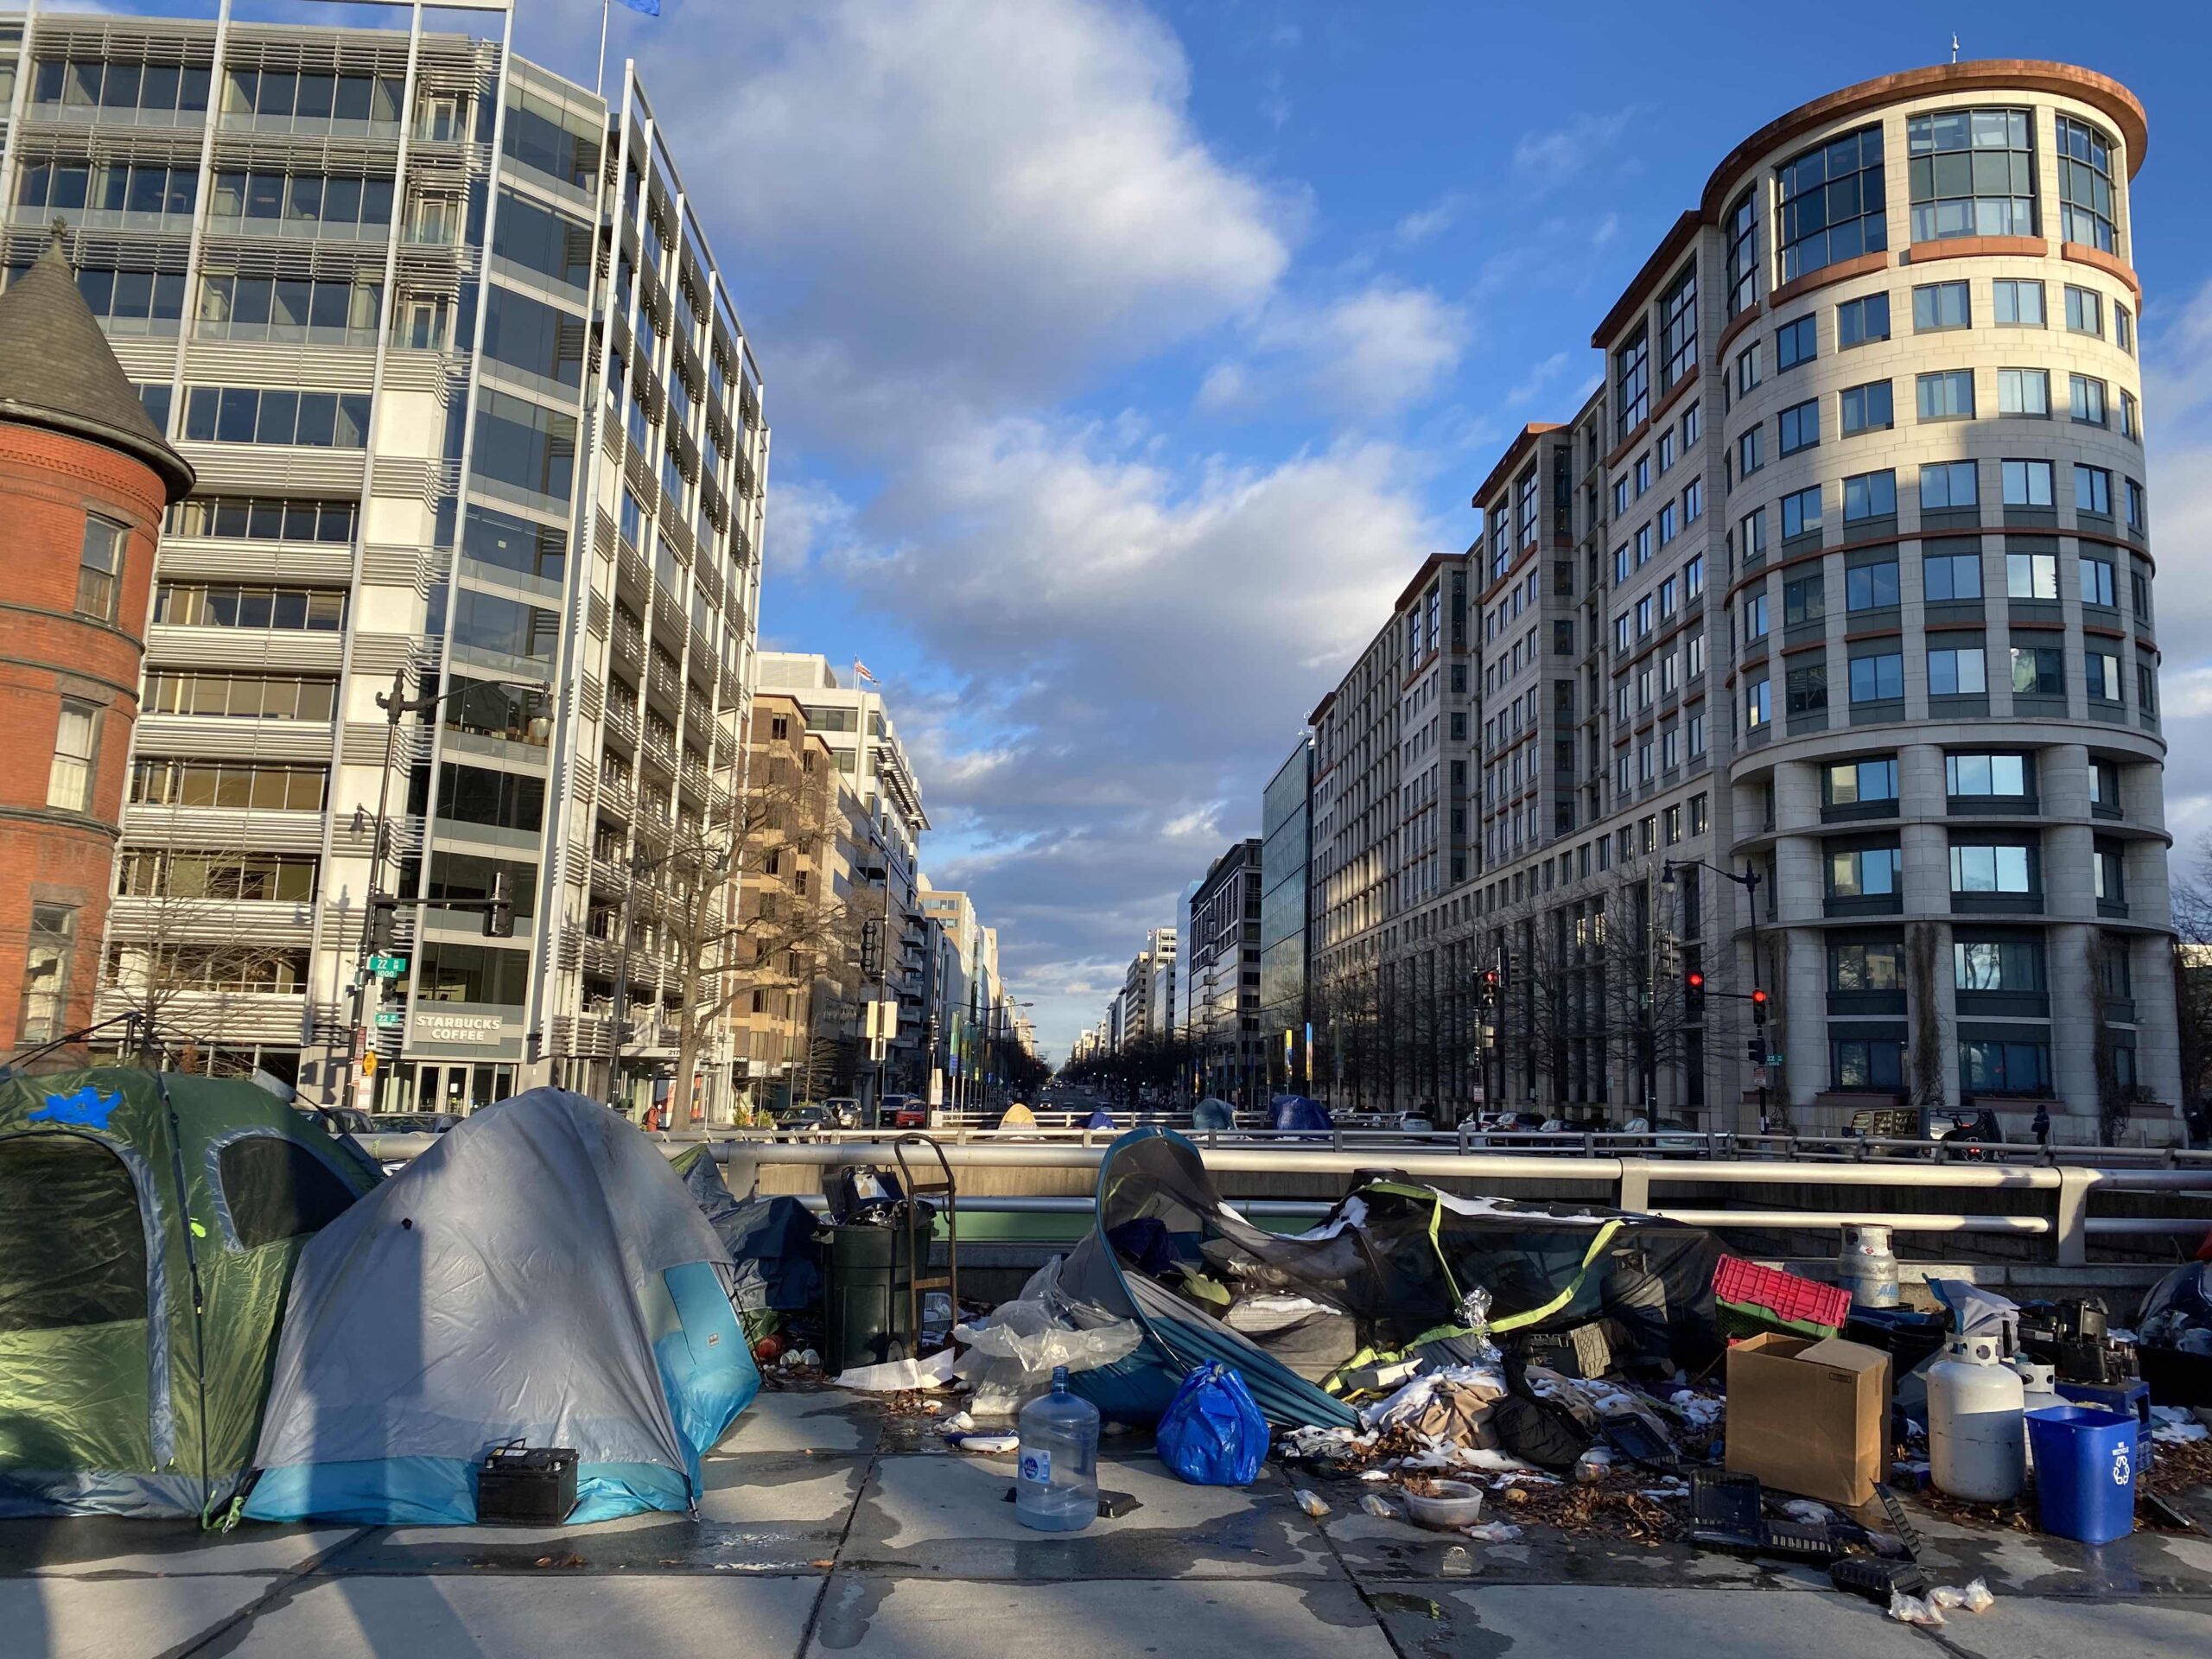 Picture shows an Encampment near Washington Circle Park, showing three tents and personal belongings.